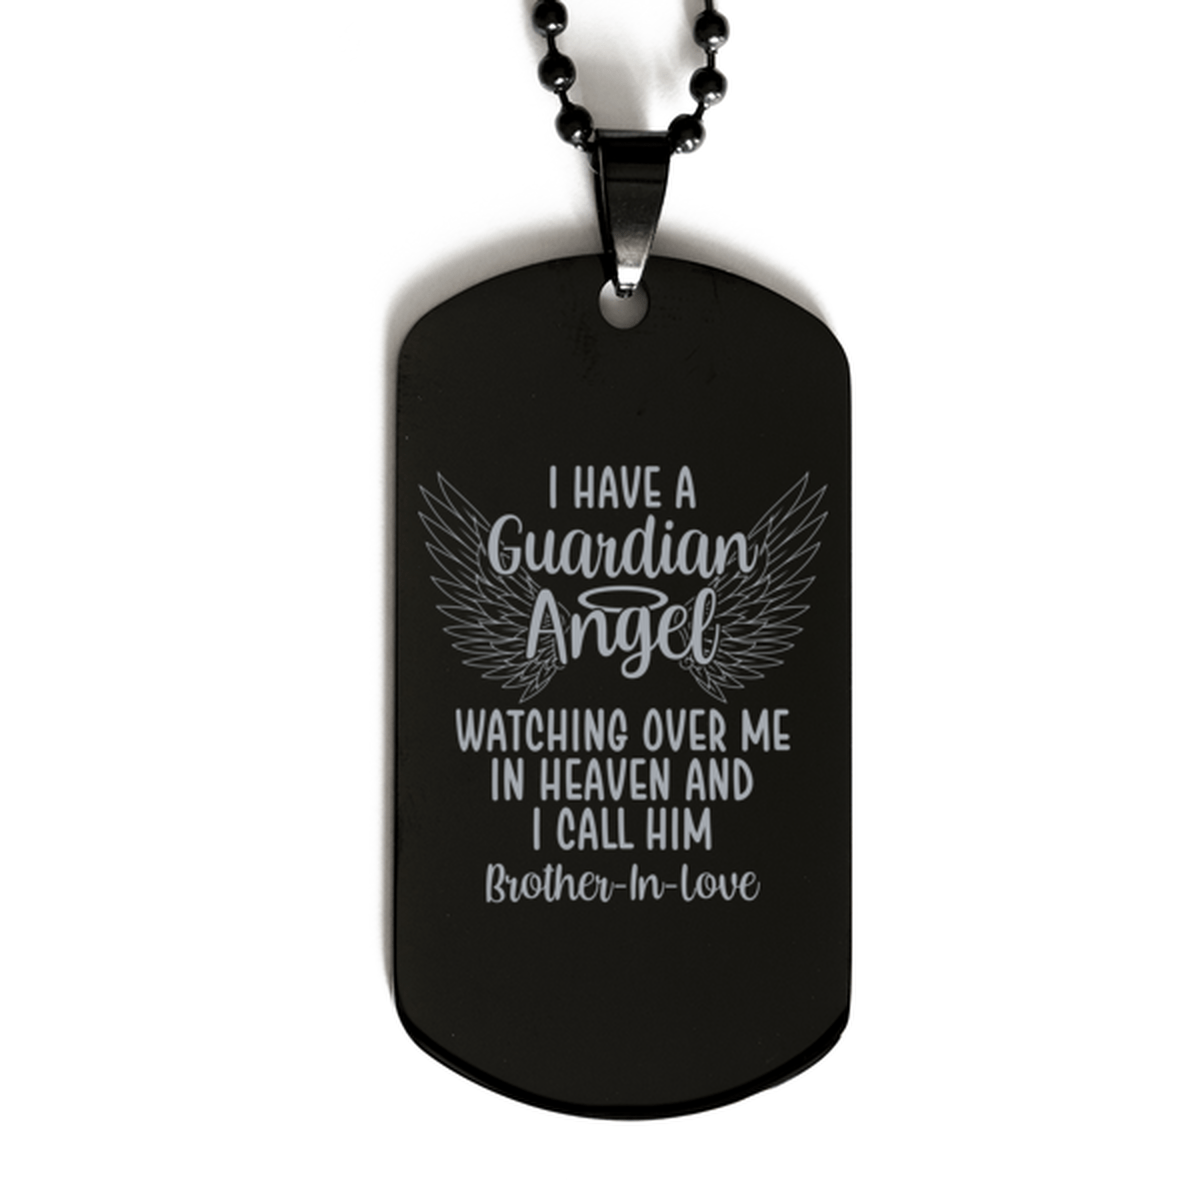 Memorial Brother-In-Love Black Dog Tag Necklace, Guardian Angel Brother-In-Love Gift, Loss of Brother-In-Love, Brother-In-Love Death, Sympathy Gift